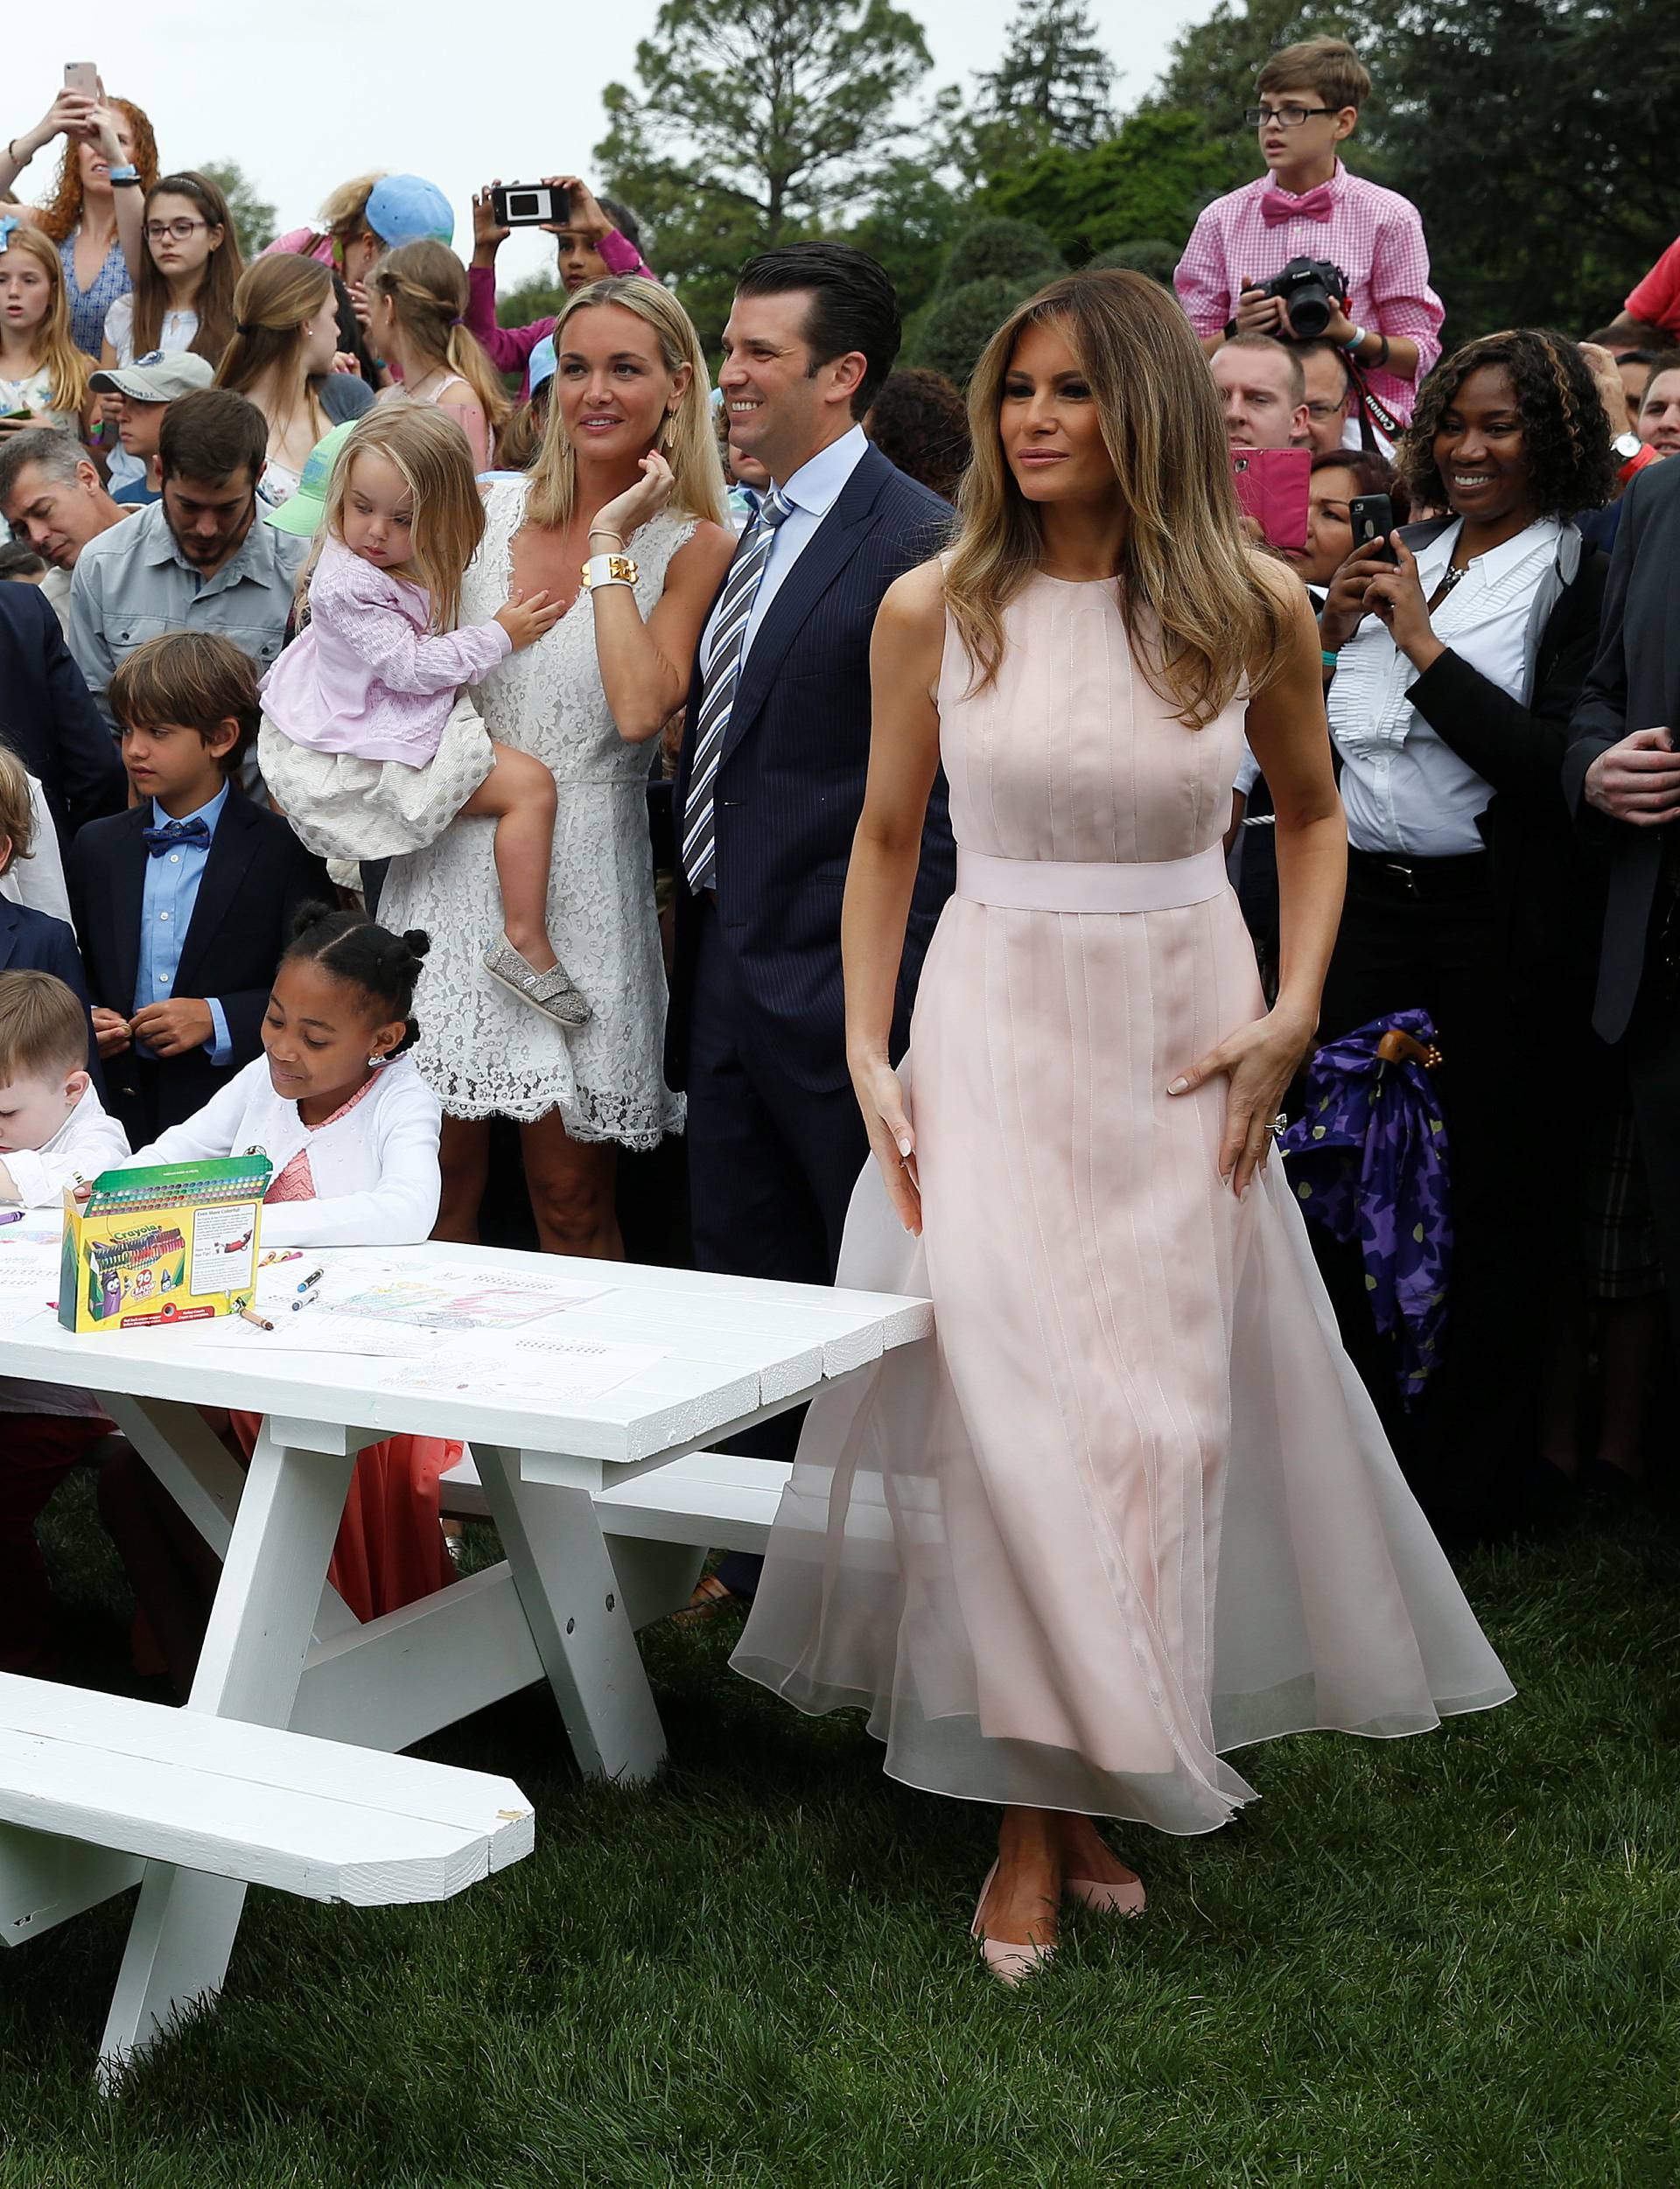 U.S. President Donald Trump and U.S. first lady Melania Trump are pictured at the 139th annual White House Easter Egg Roll on the South Lawn of the White House in Washington